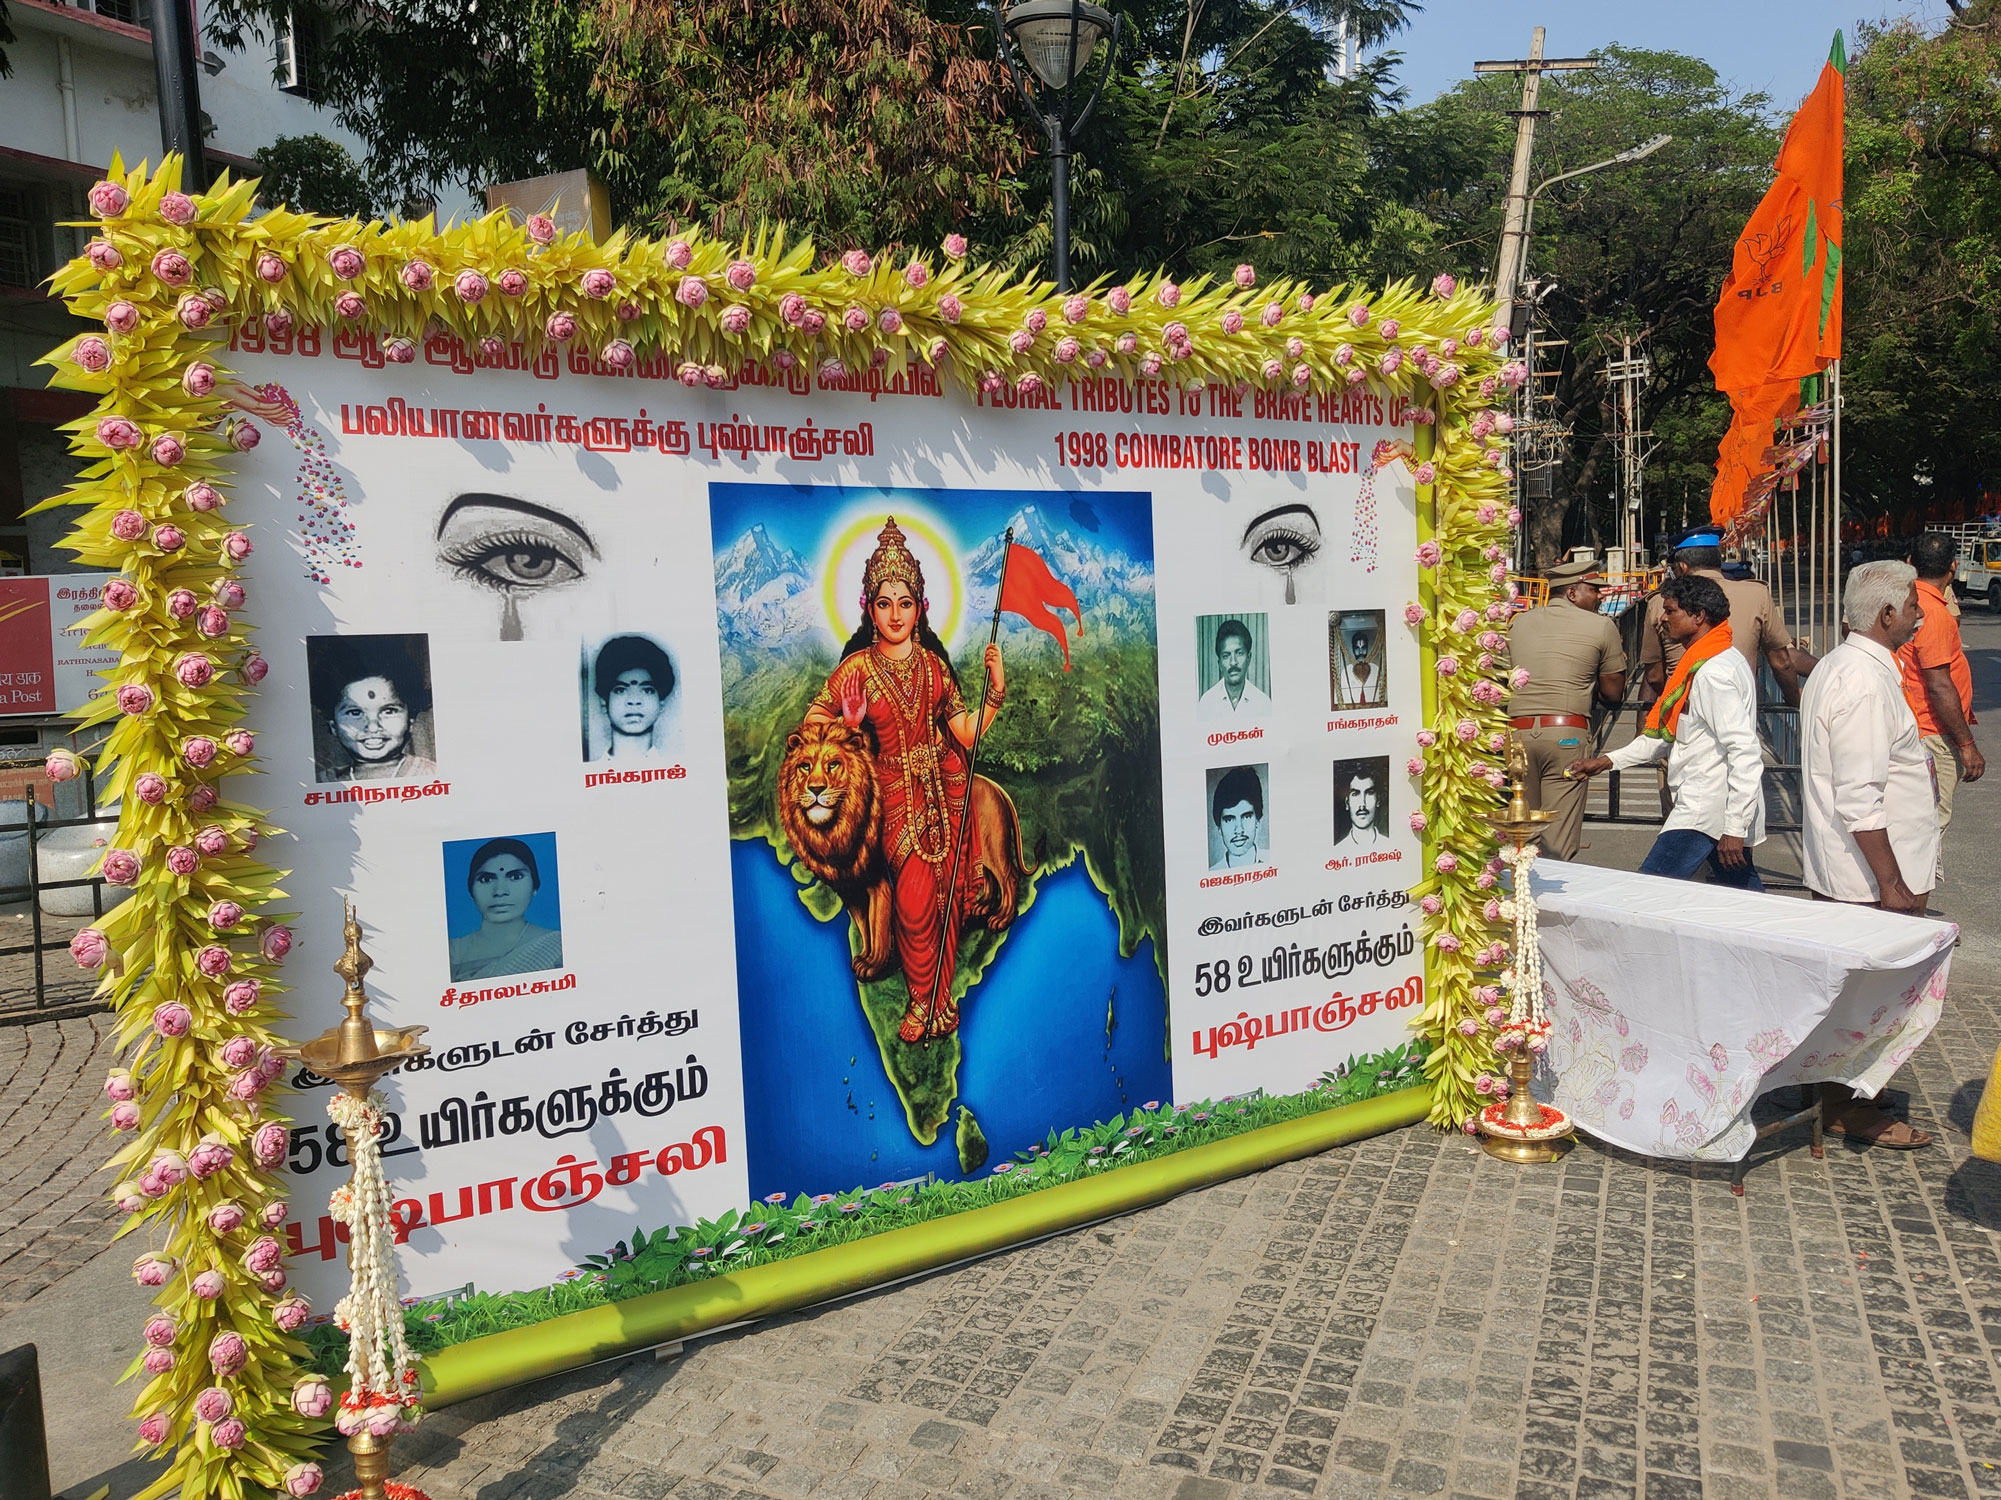 How the BJP weaponised dominant-caste interests in its Coimbatore campaign